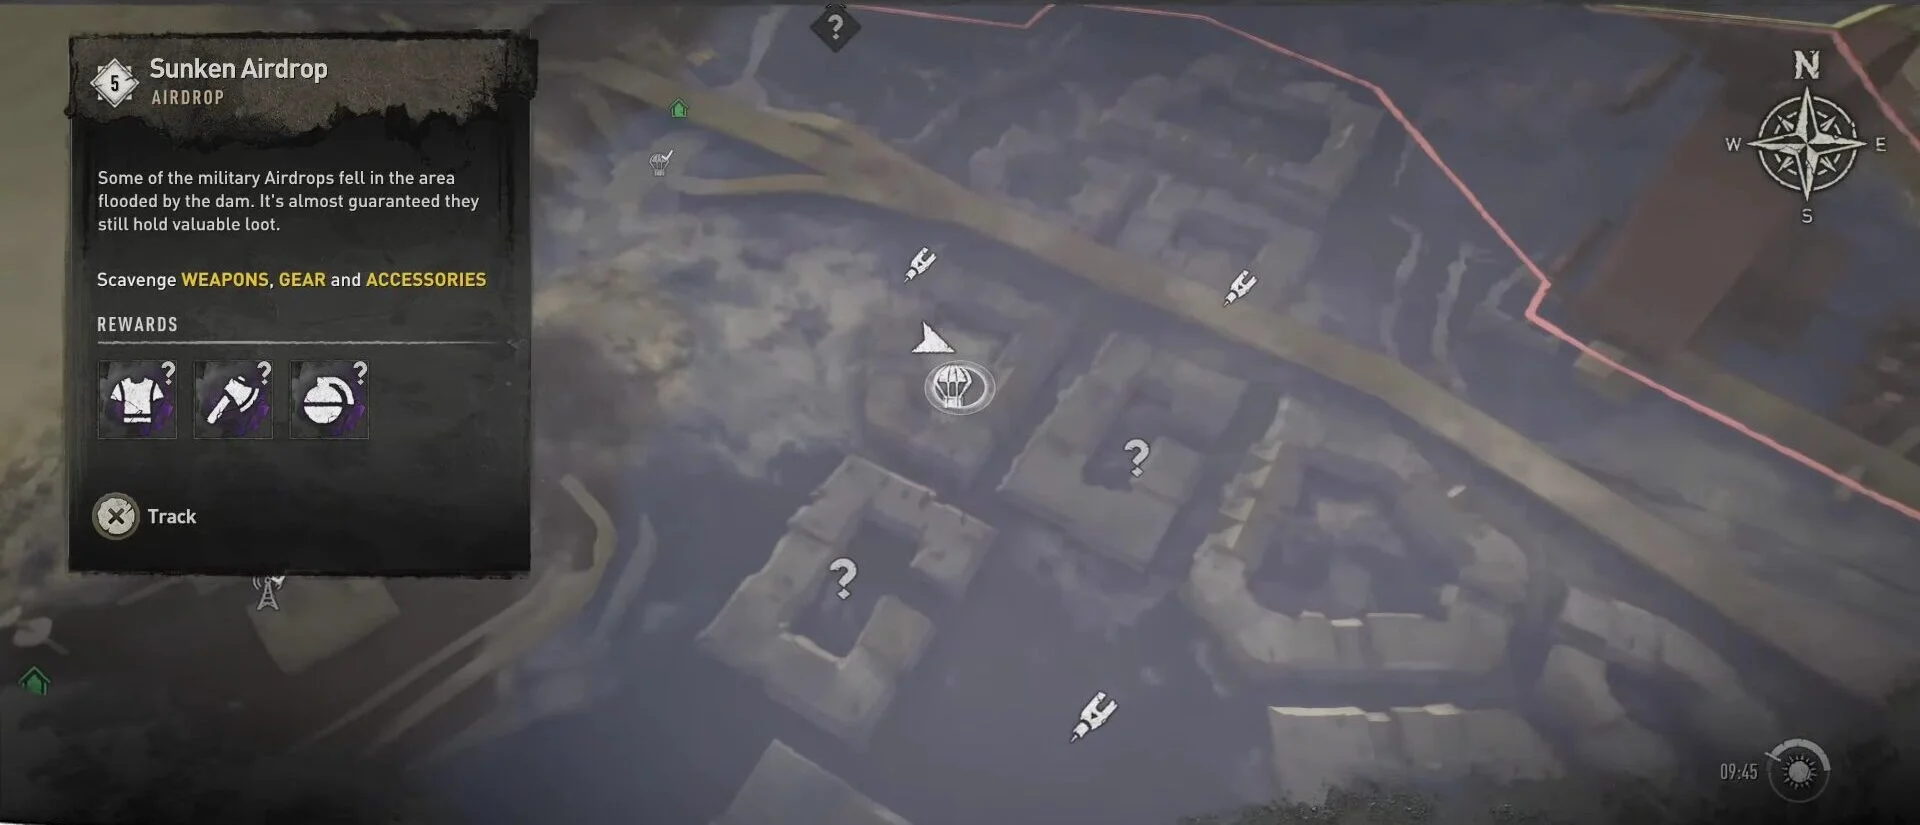 Dying Light 2 Sunken Airdrop (2) Map Location